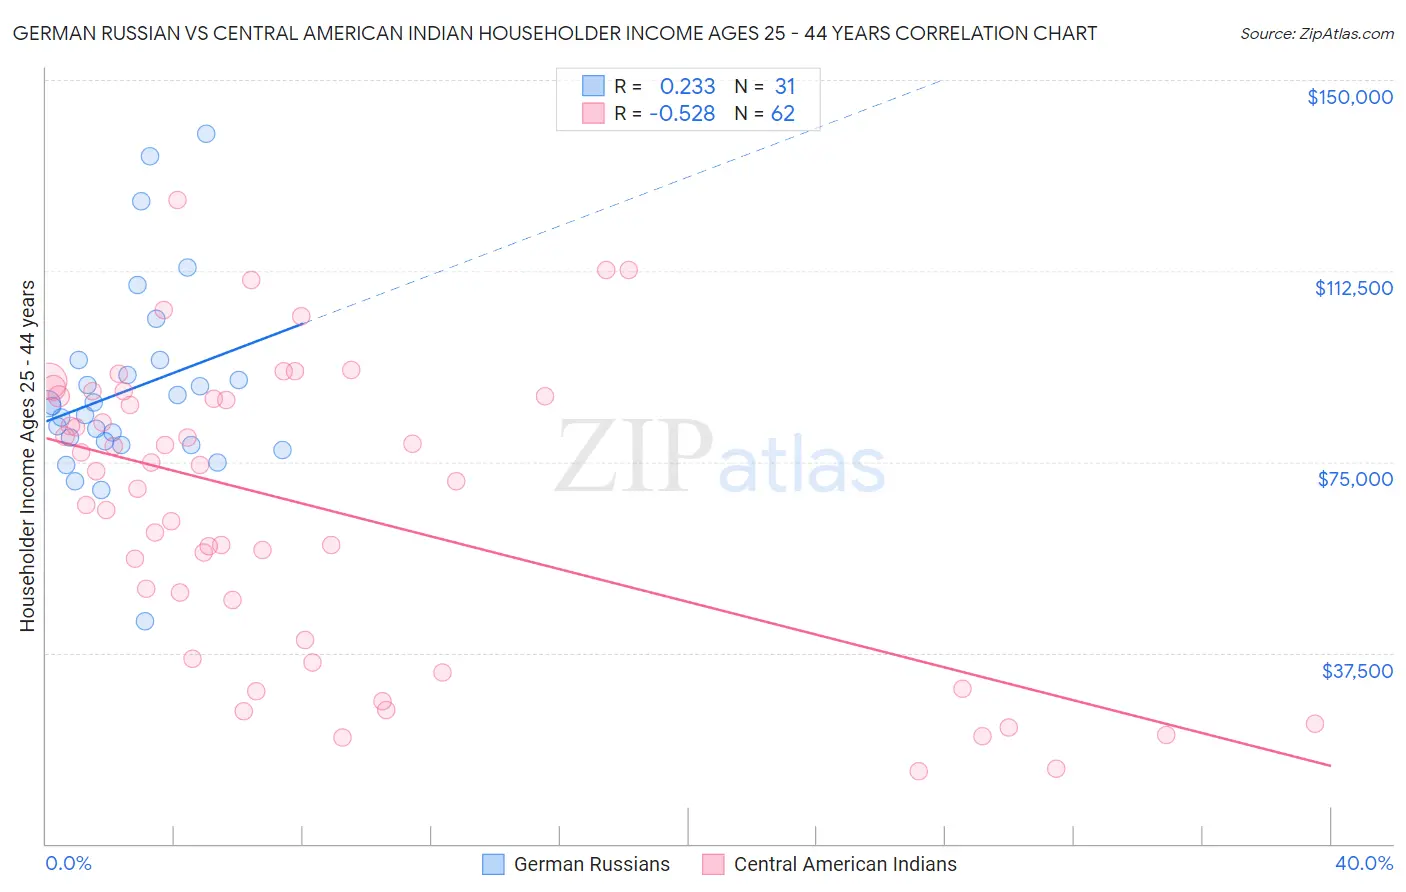 German Russian vs Central American Indian Householder Income Ages 25 - 44 years